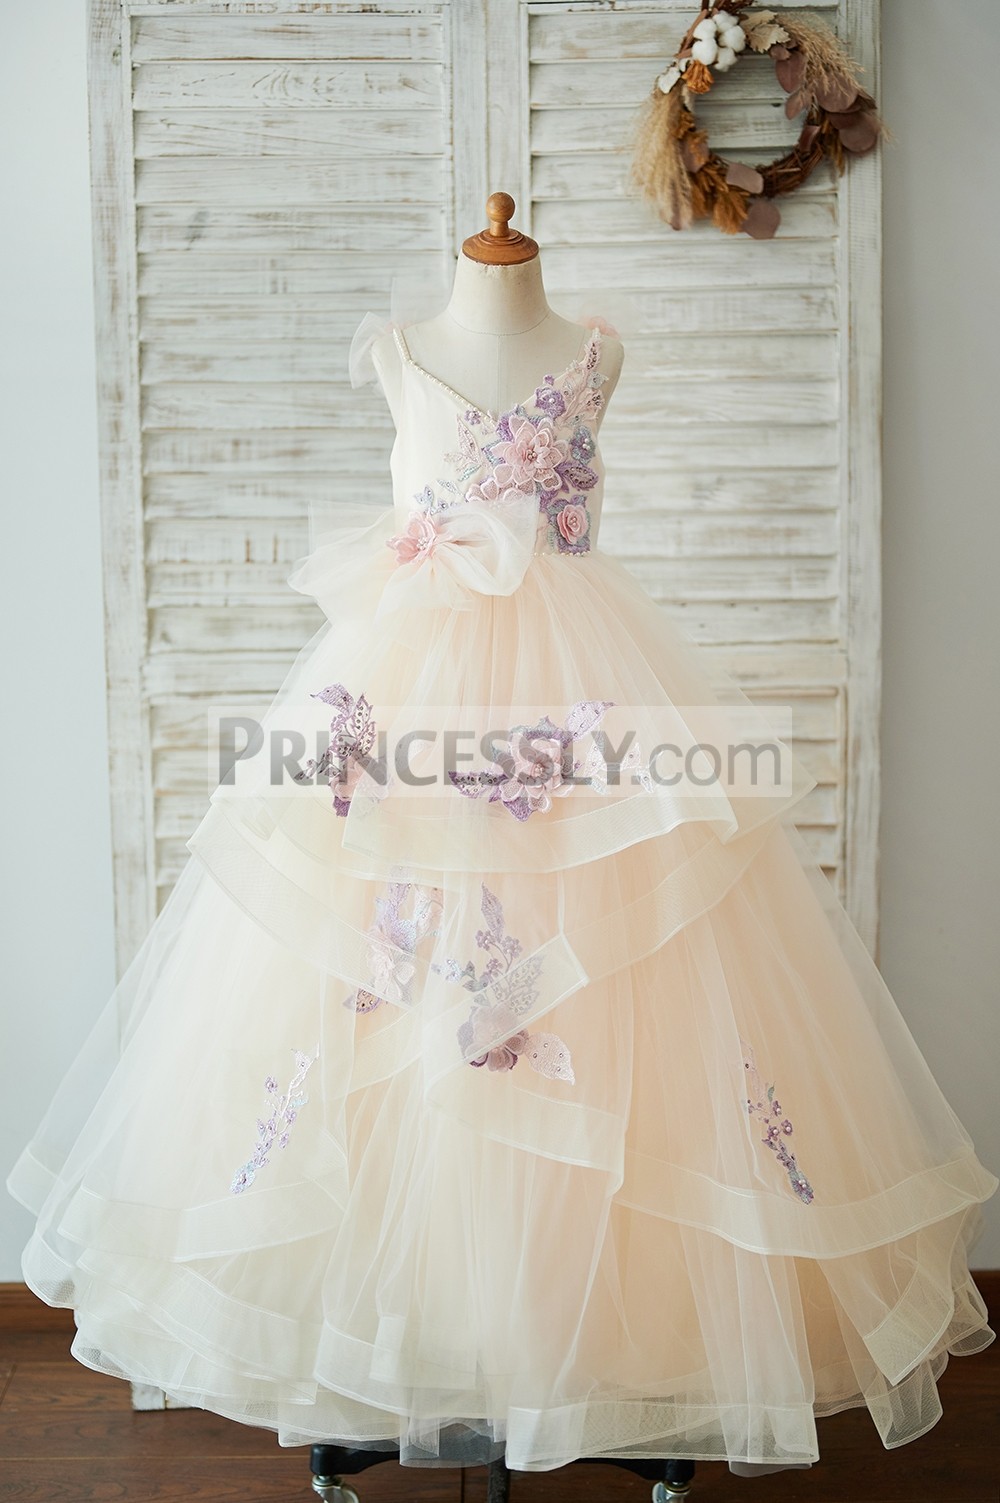 Princessly.com-K1003923-Champagne Tulle Spaghetti Straps Pearls Wedding Flower Girl Dress with Embroidery Lace-31